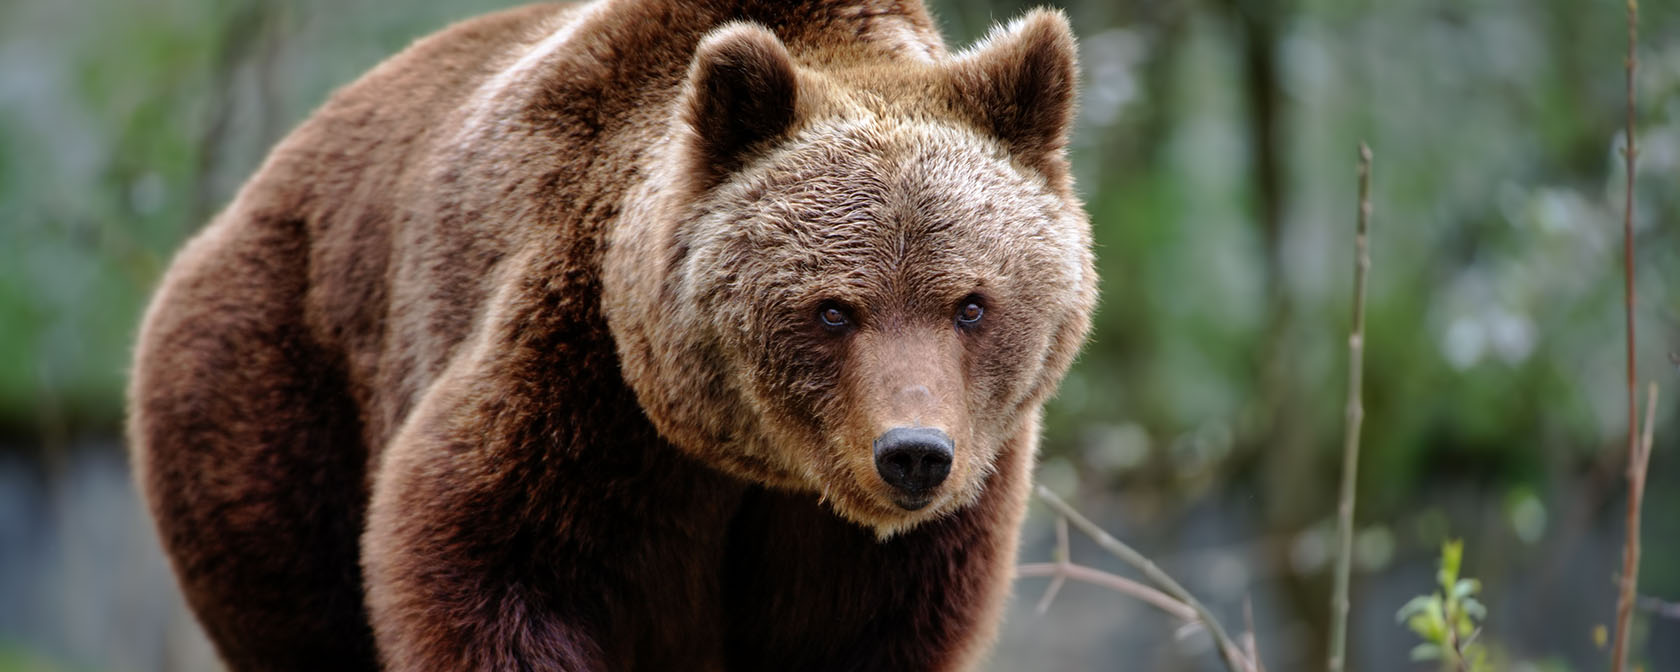 Breaking: New threats to grizzlies, wolves and Endangered Species Act emerge in Congress